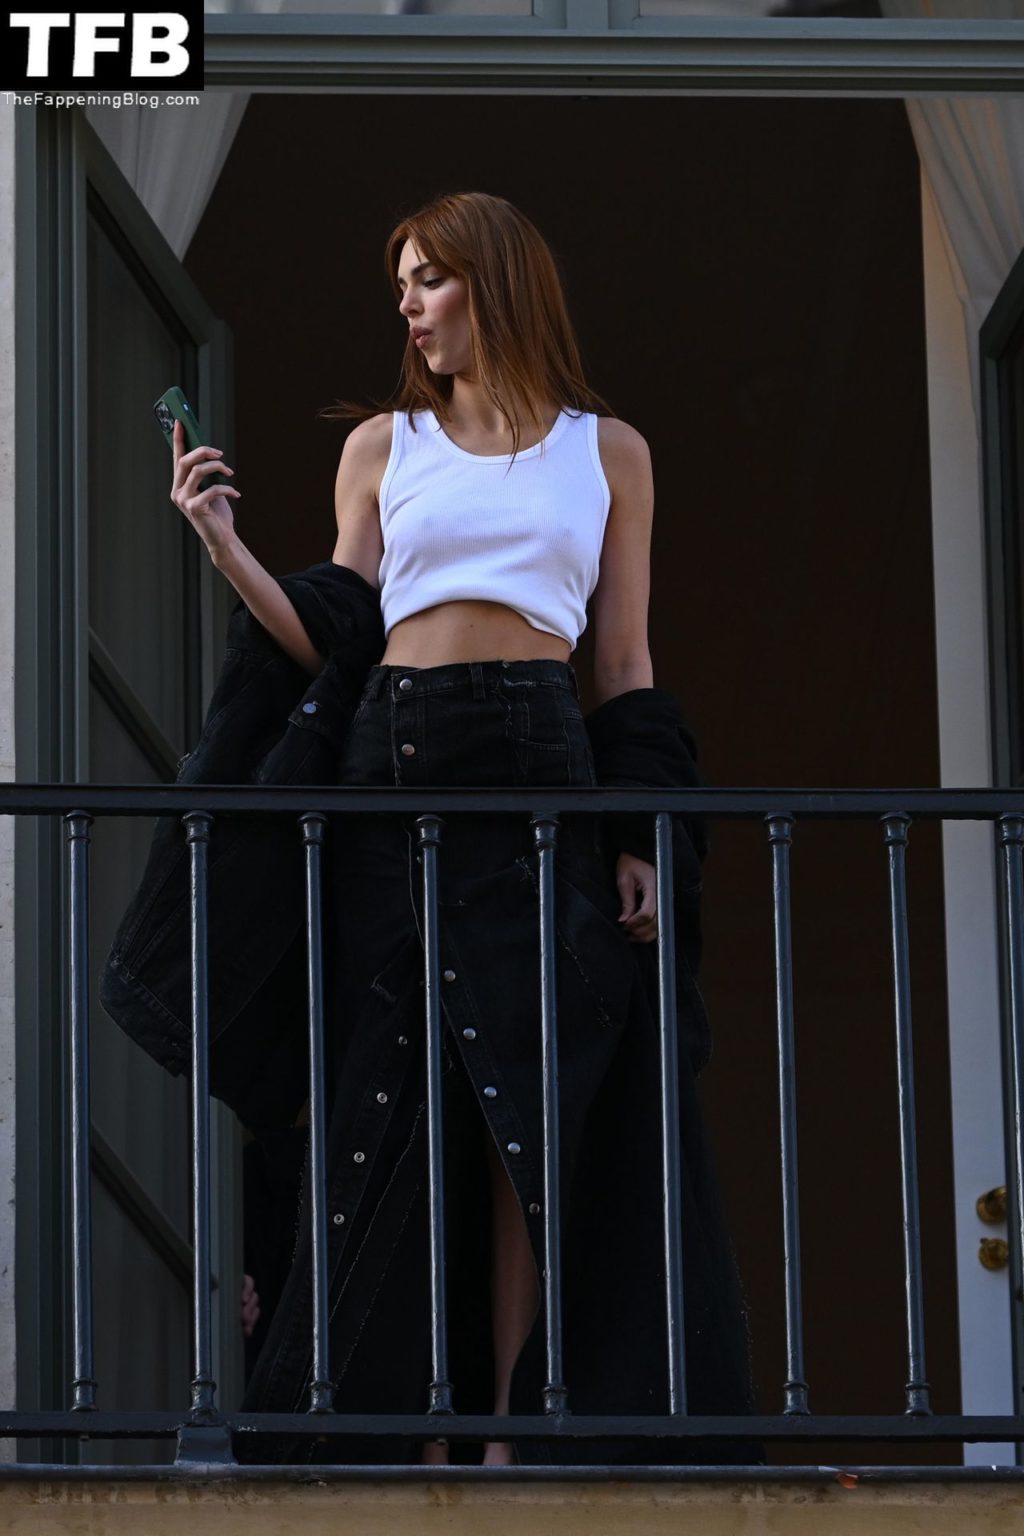 Kendall Jenner Braless The Fappening Blog 2 1024x1536 - Braless Kendall Jenner Poses in Paris (141 Photos)